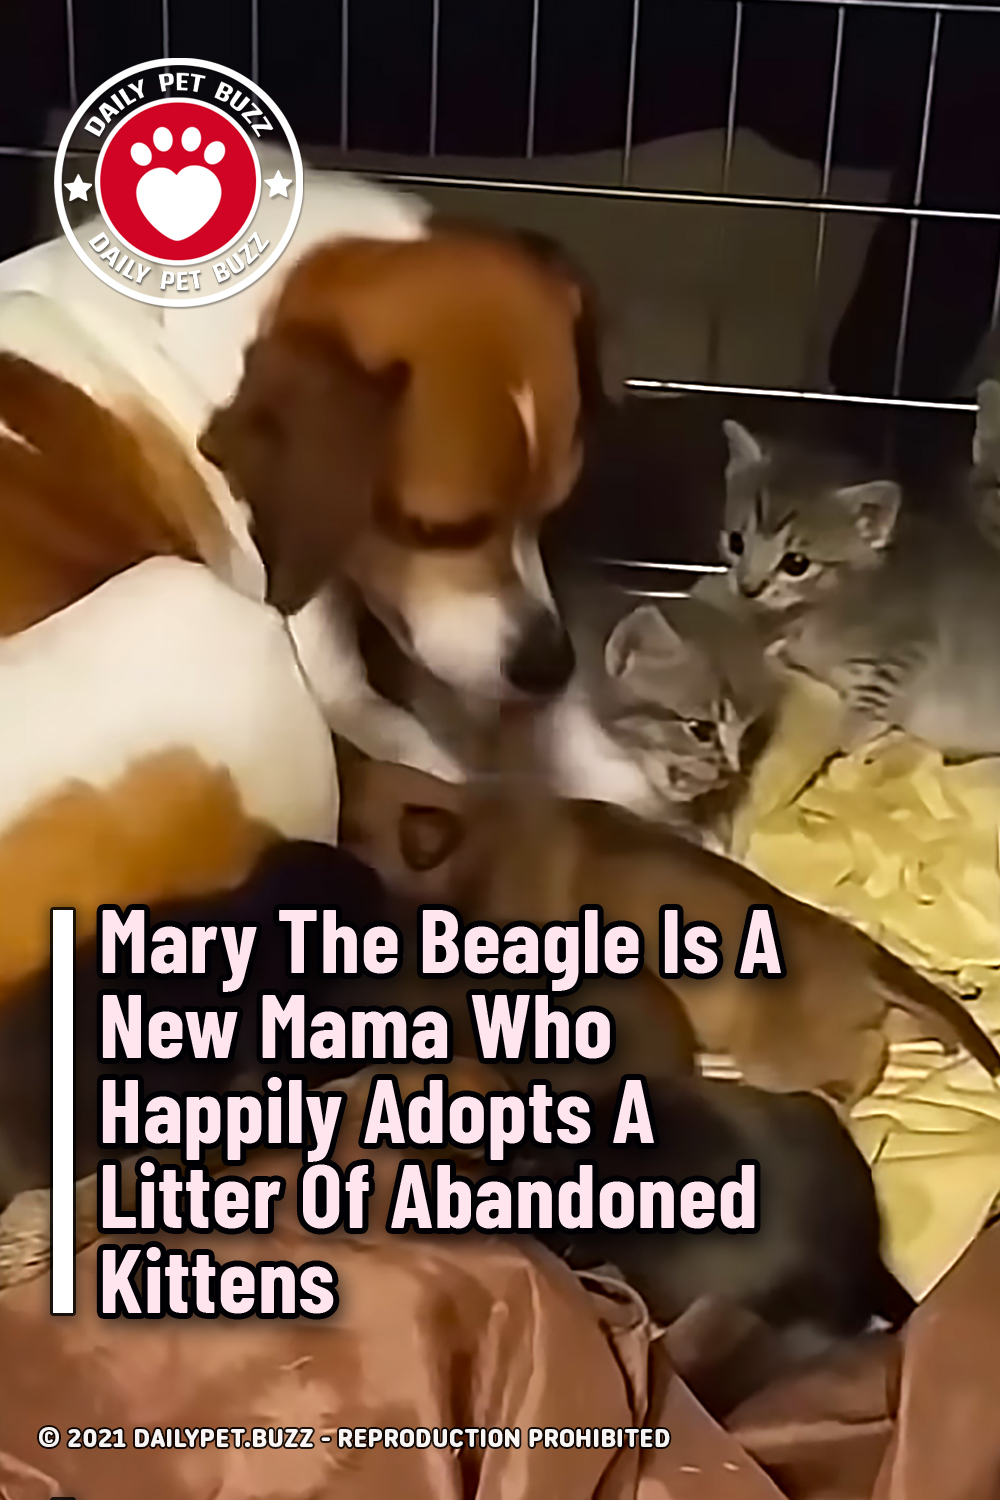 Mary The Beagle Is A New Mama Who Happily Adopts A Litter Of Abandoned Kittens